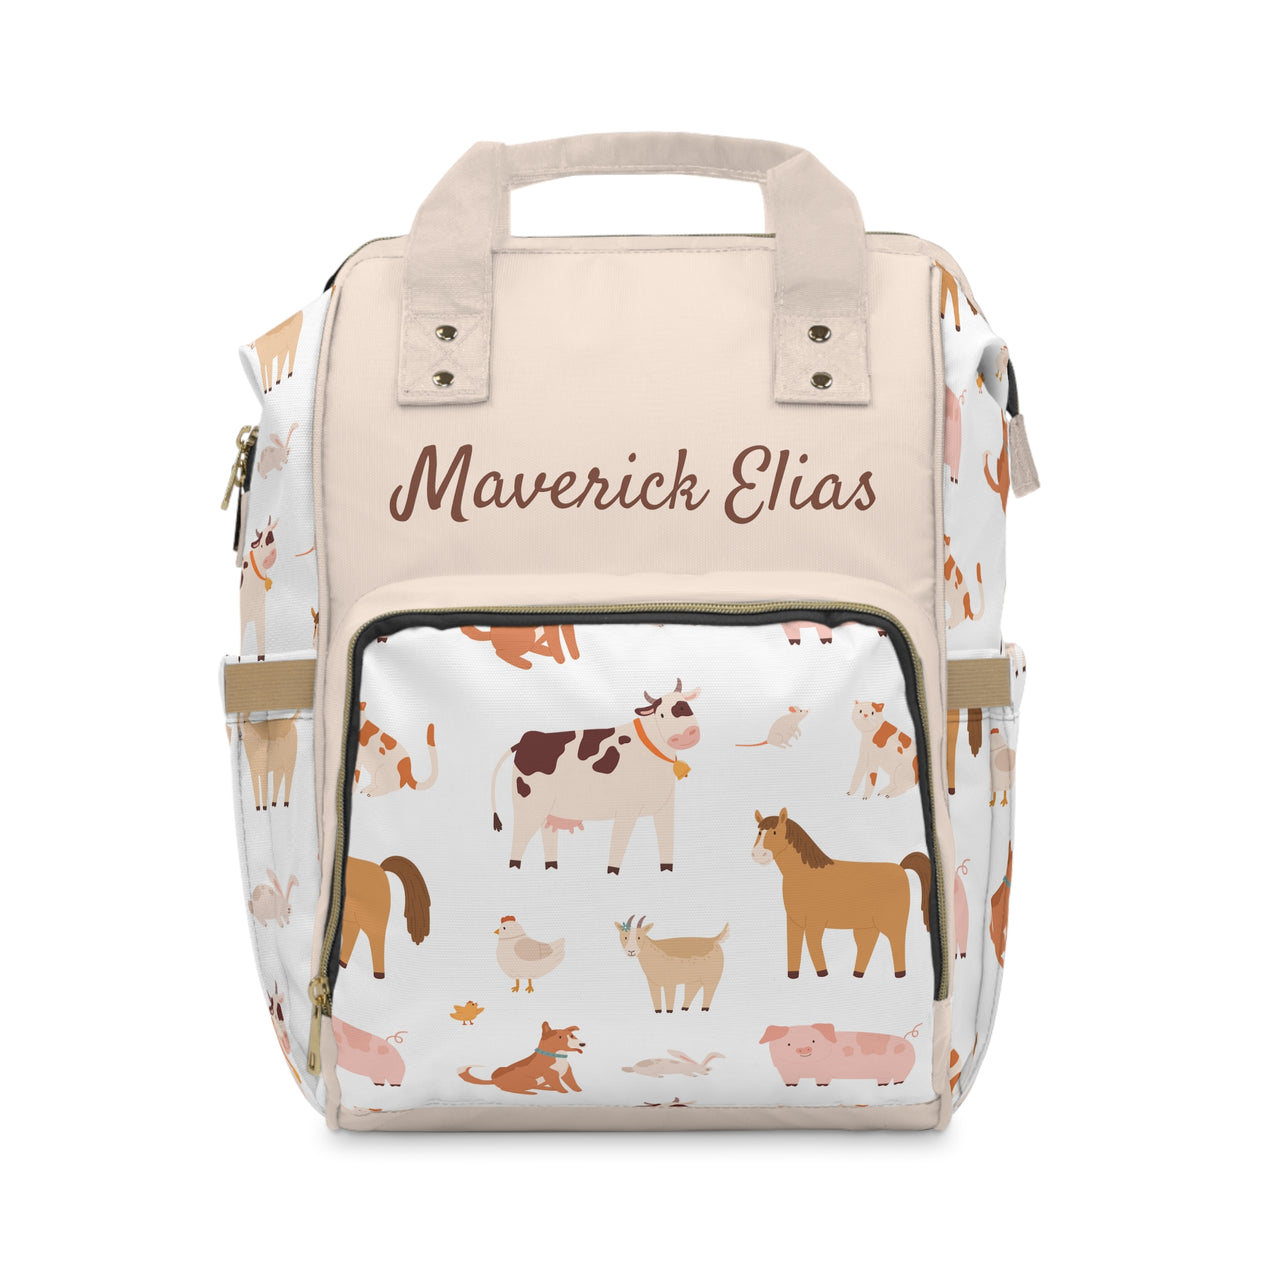 Personalized Farm Animals Multifunctional Diaper Backpack, Newborn Gift, Baby Shower Gift, Baby Diaper Bag Nappy Stroller Bag